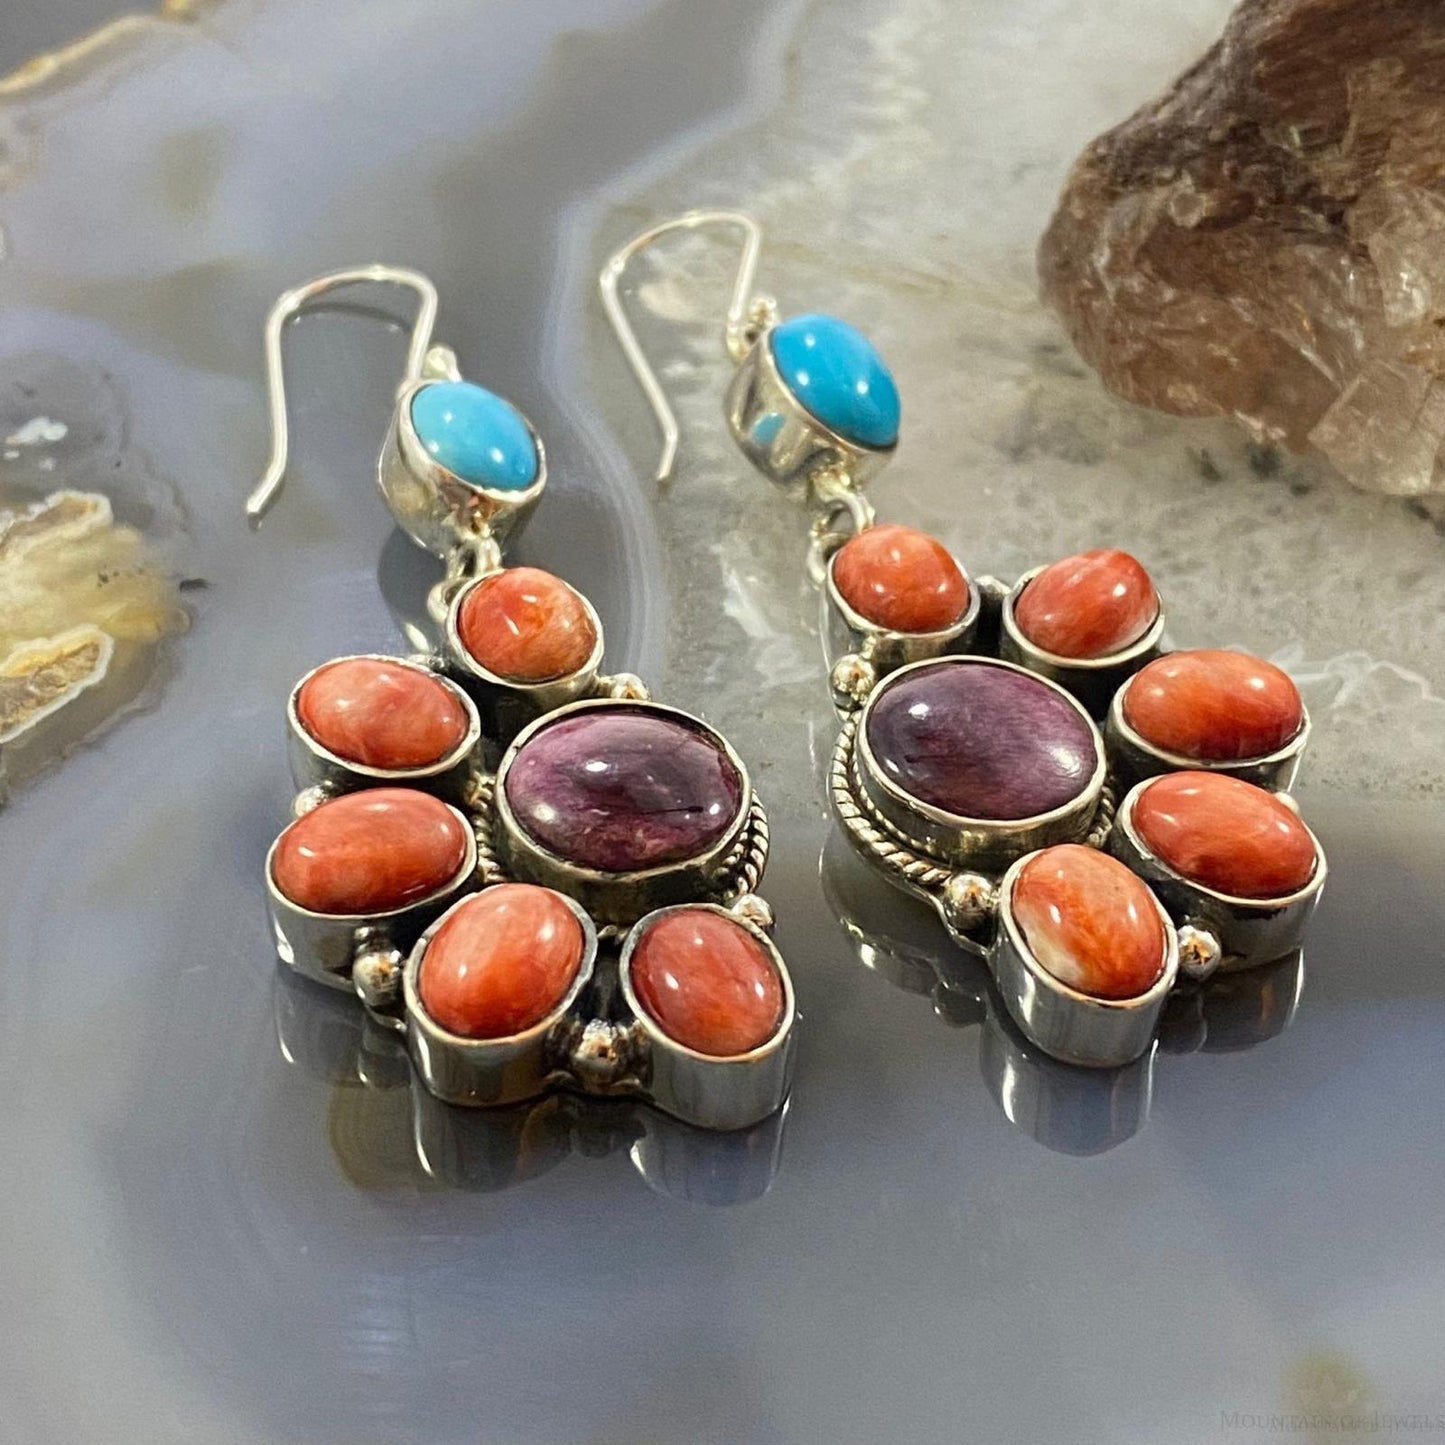 Native American Sterling Turquoise, Purple & Orange Spiny Oyster Dangle Earrings For Women - Mountain of Jewels